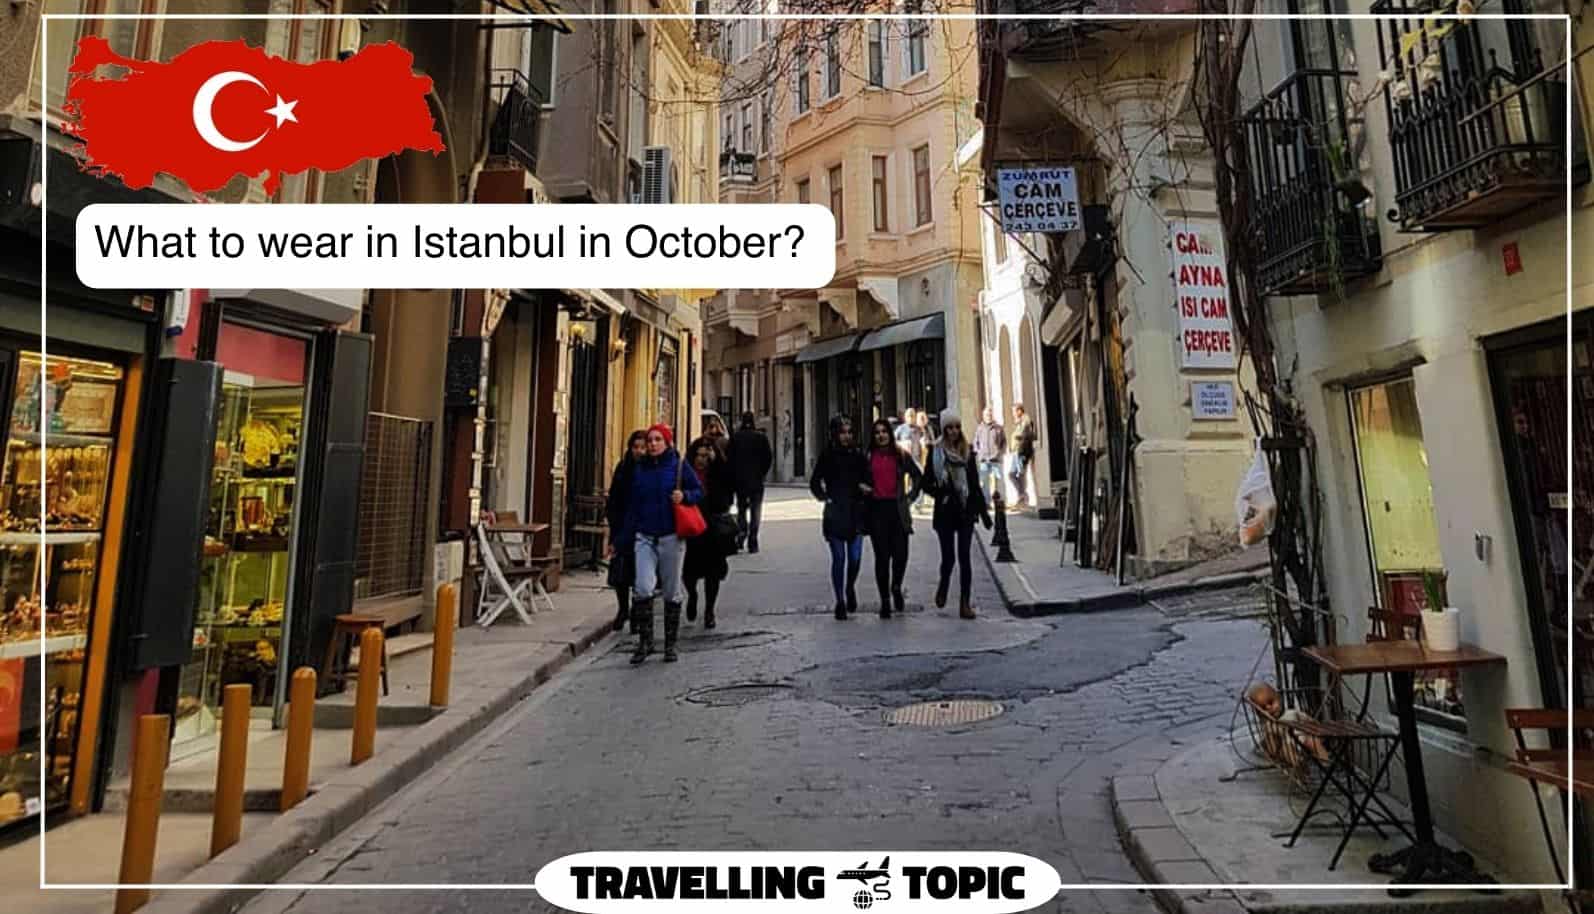 What to wear in Istanbul in October